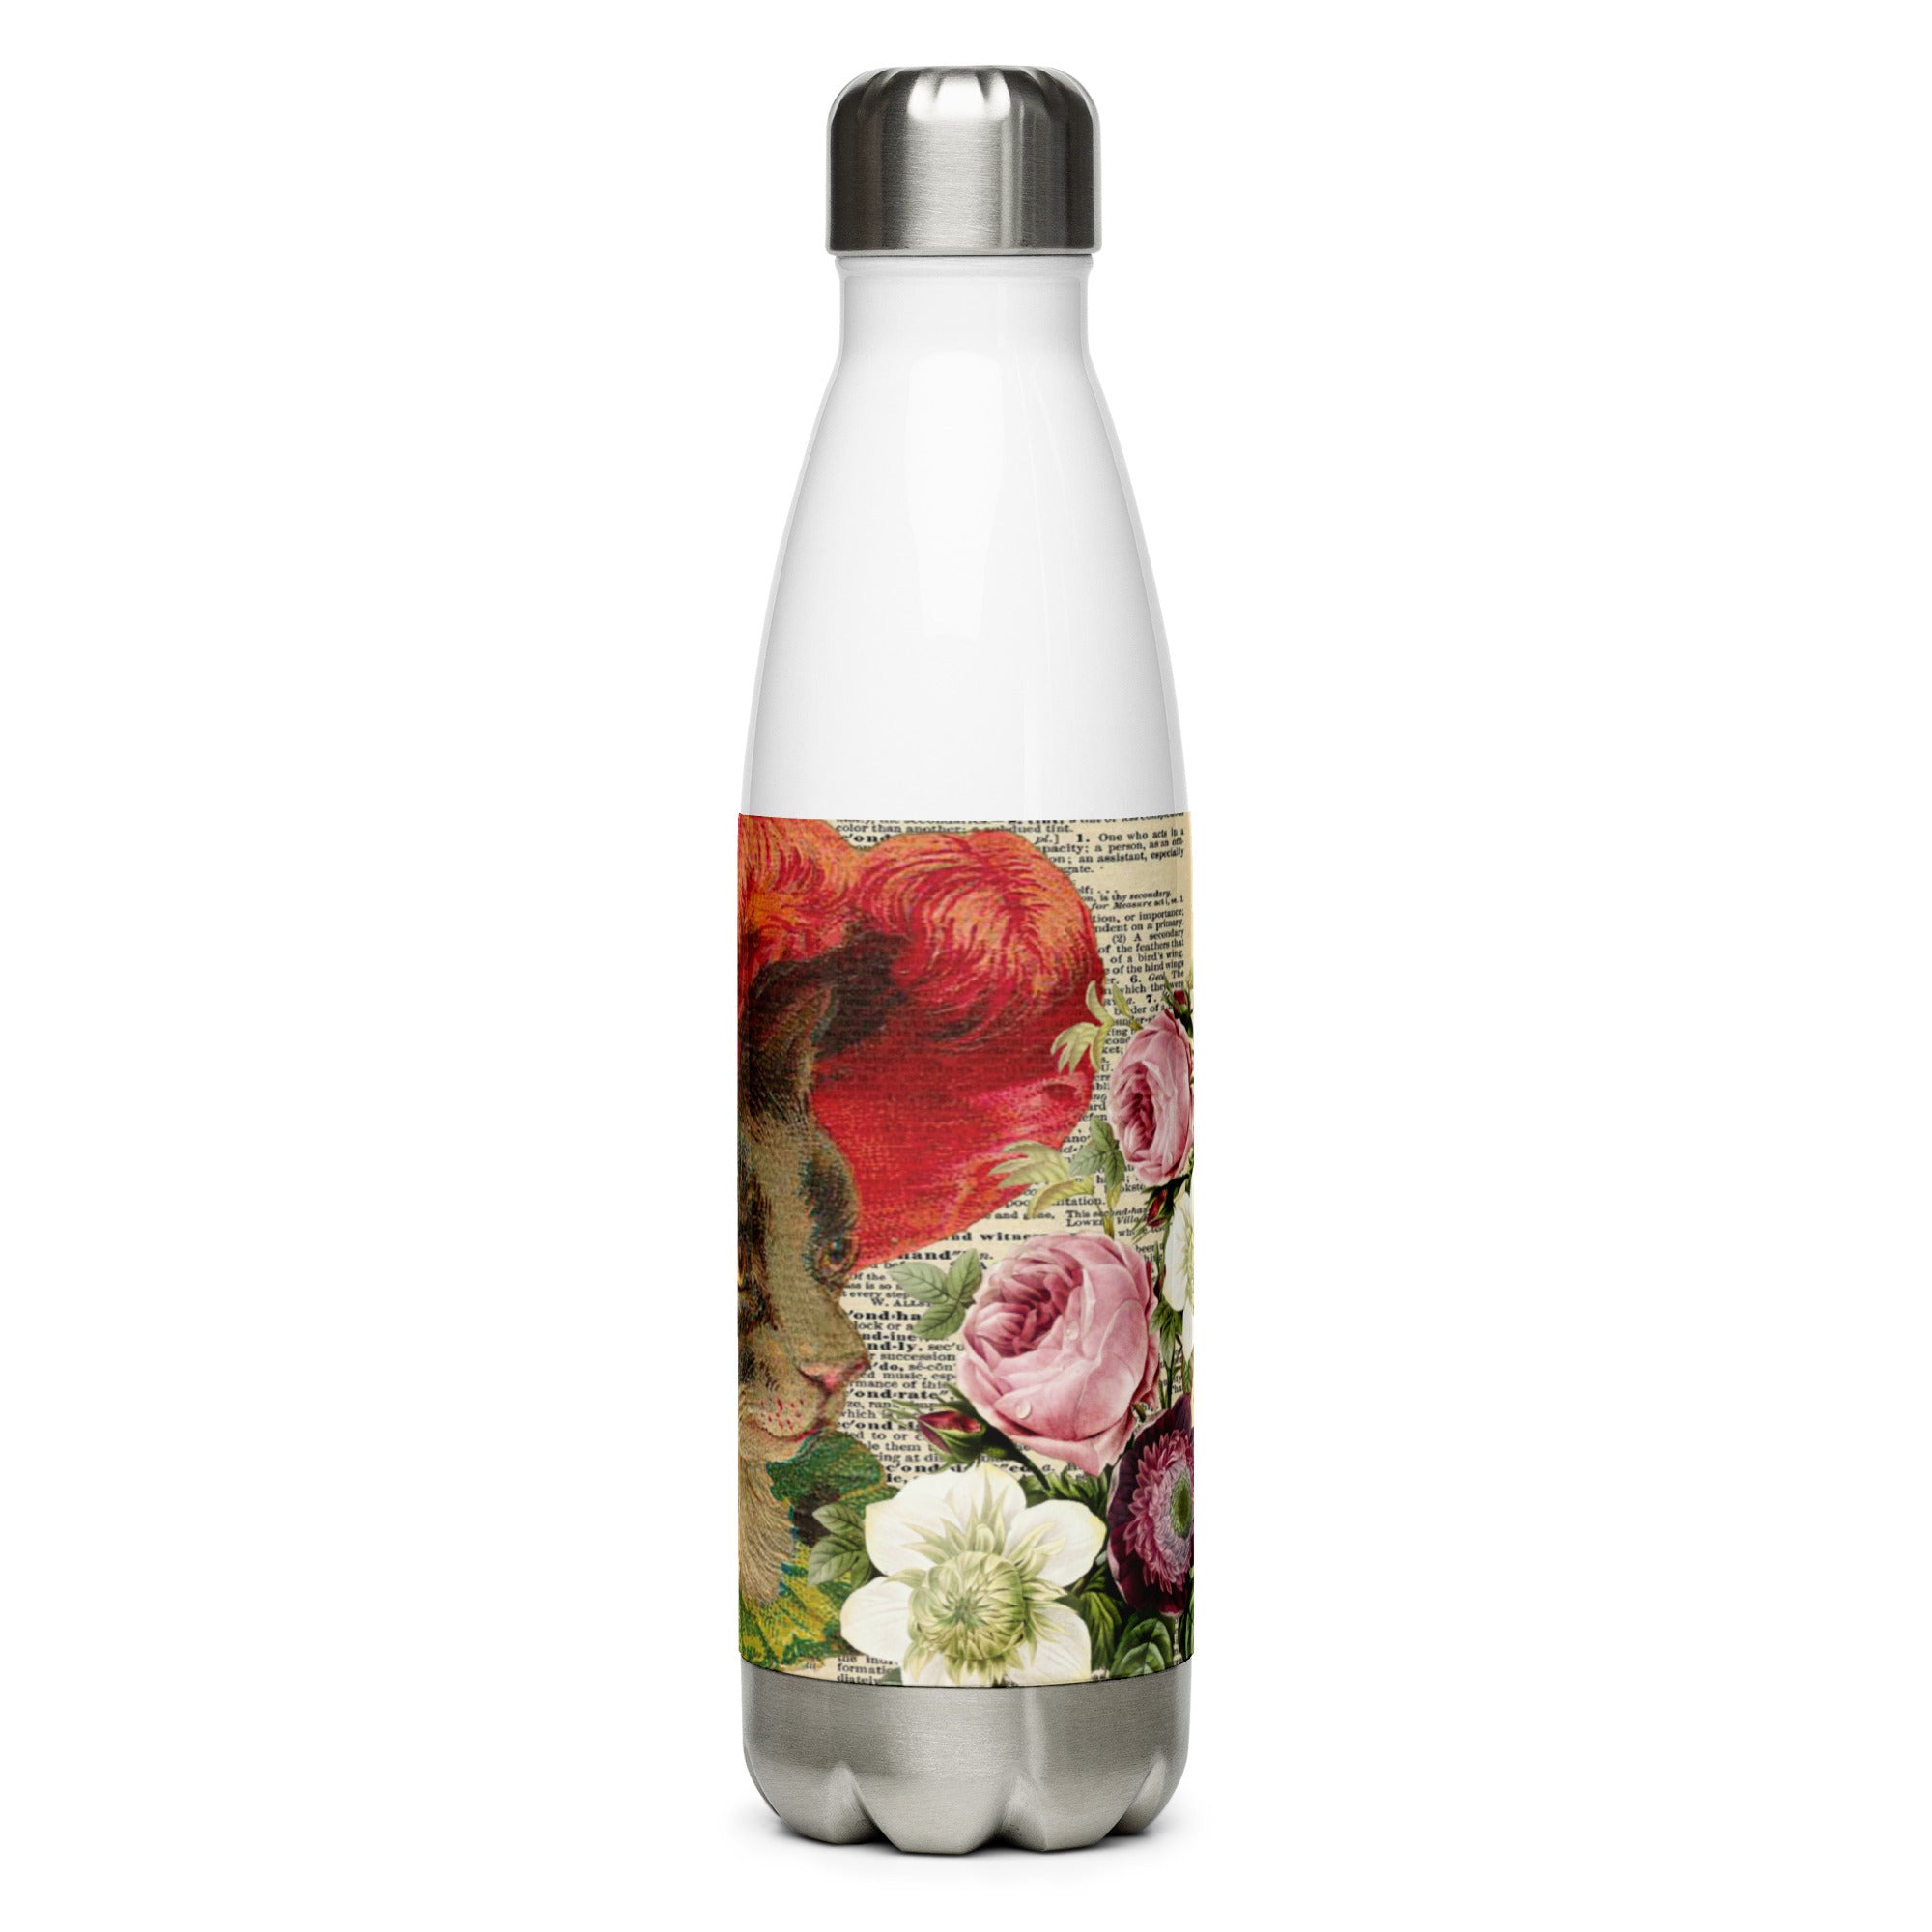 Vintage Cat with Hat Floral Stainless Steel Water Bottle